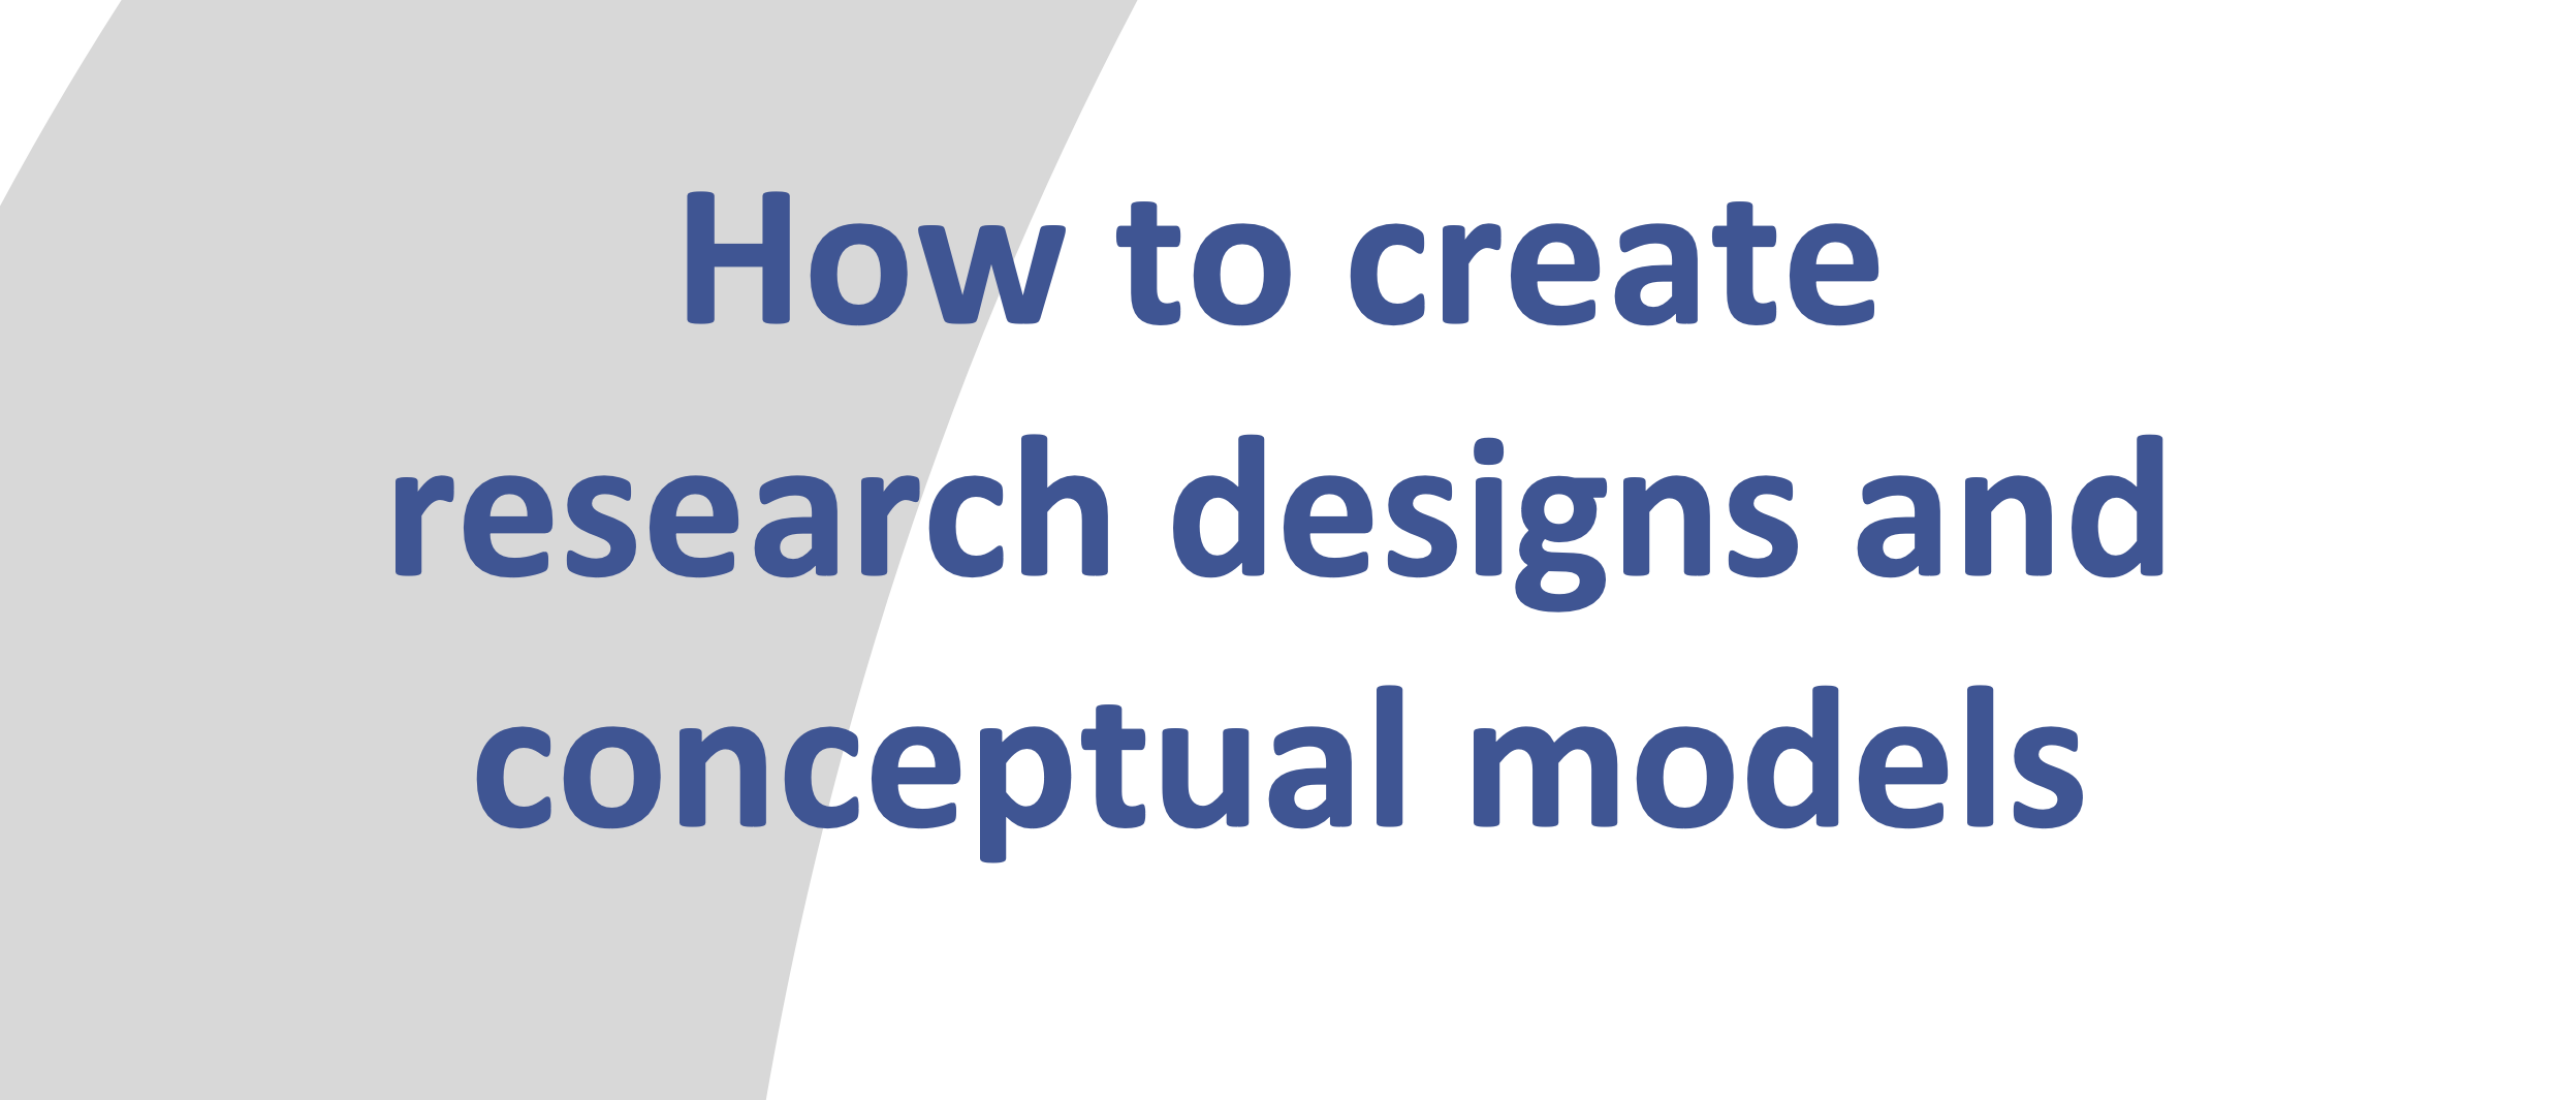 Manual: How to create research designs and conceptual models